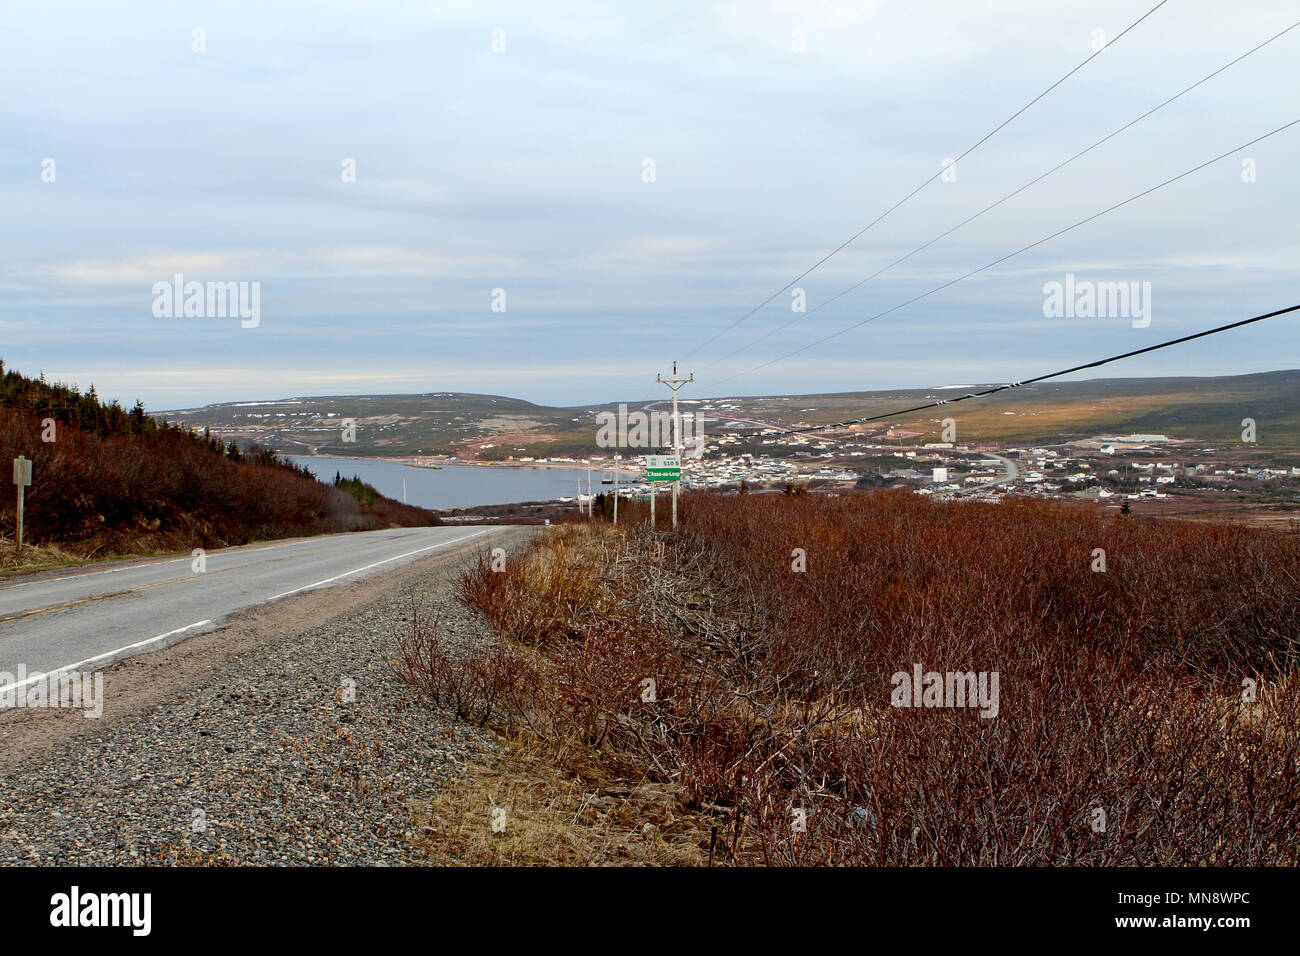 Small village, L'ANS AU LOUP, Labrador, Canada, on the Strait of Belle Isle. Stock Photo